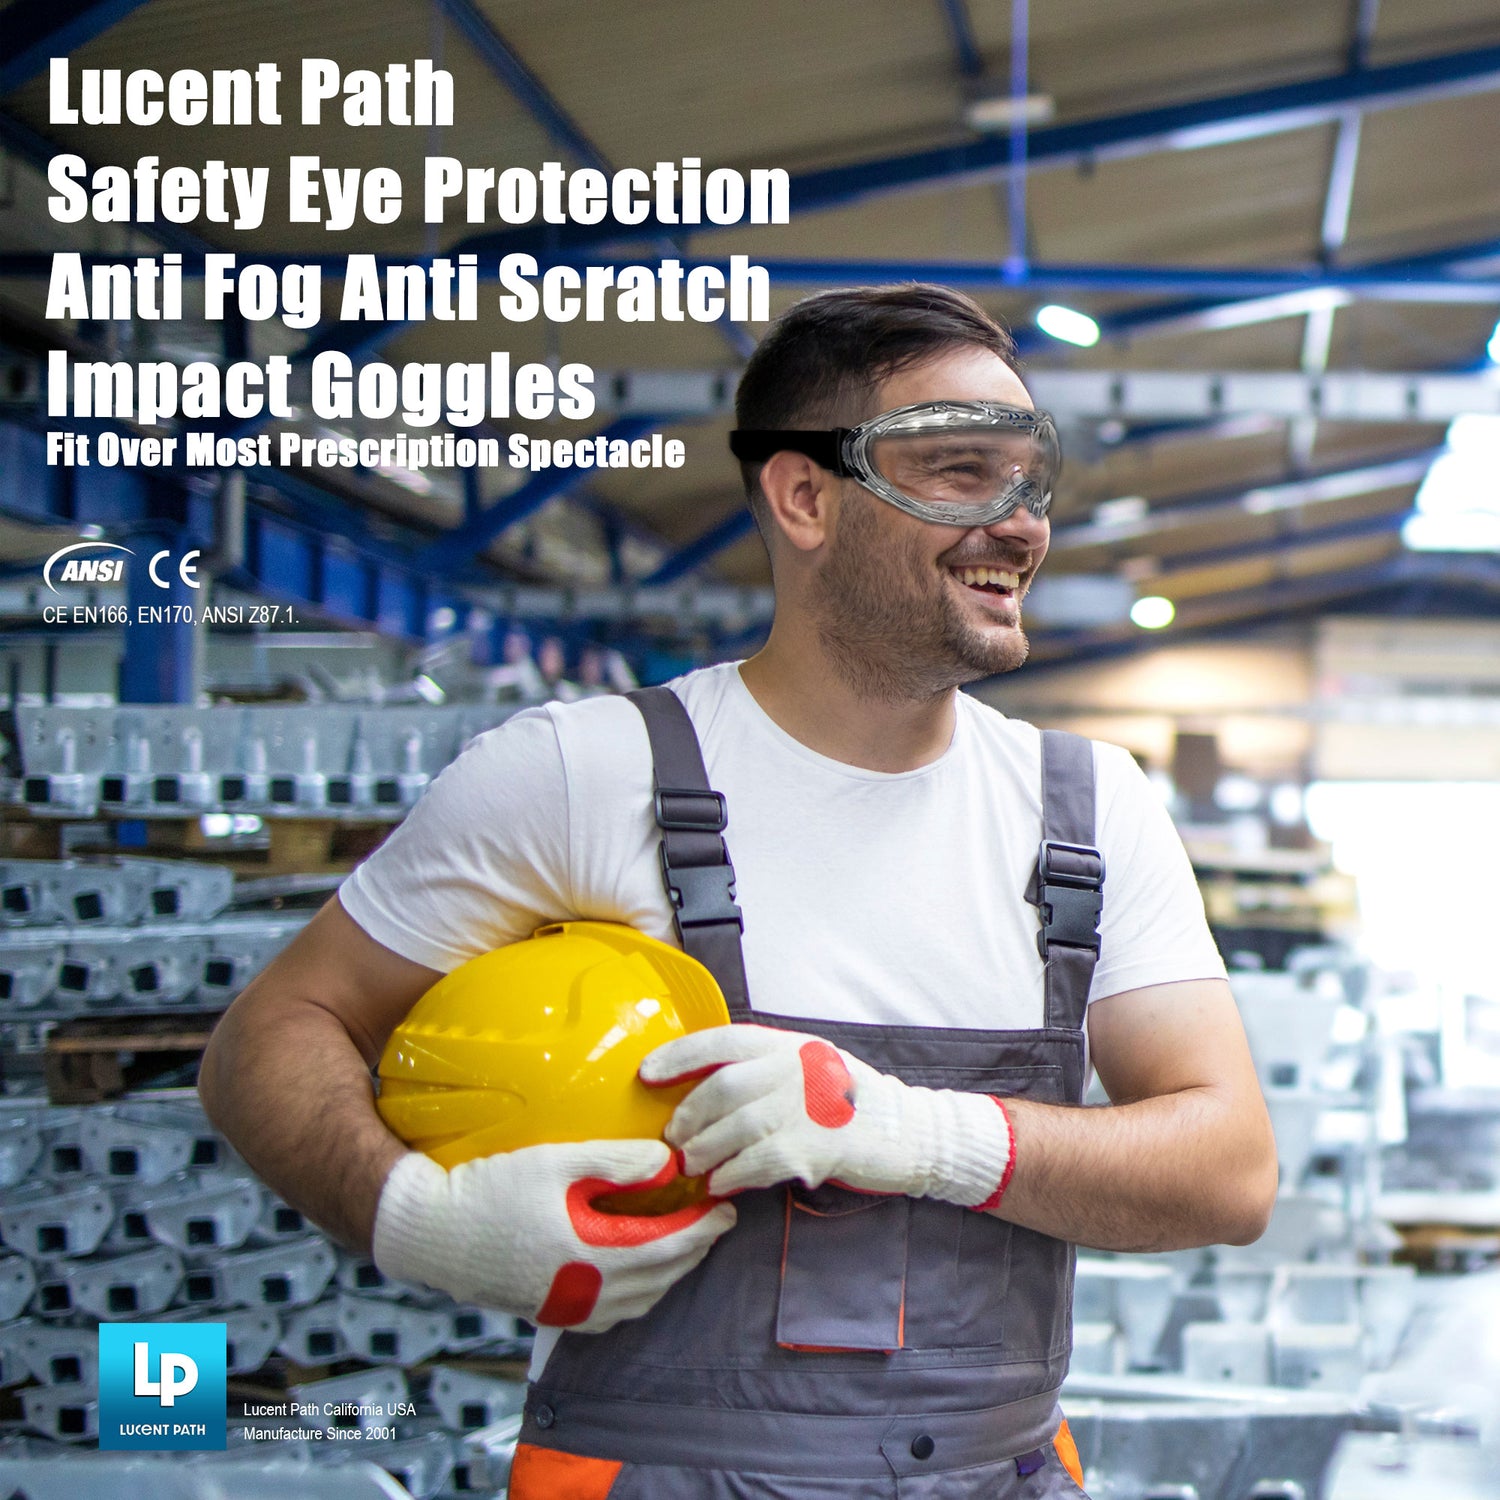 Lucent Path Safety Eye Protection Anti Fog Anti Scratch Impact Goggles Fit Over Most Prescription Spectacle